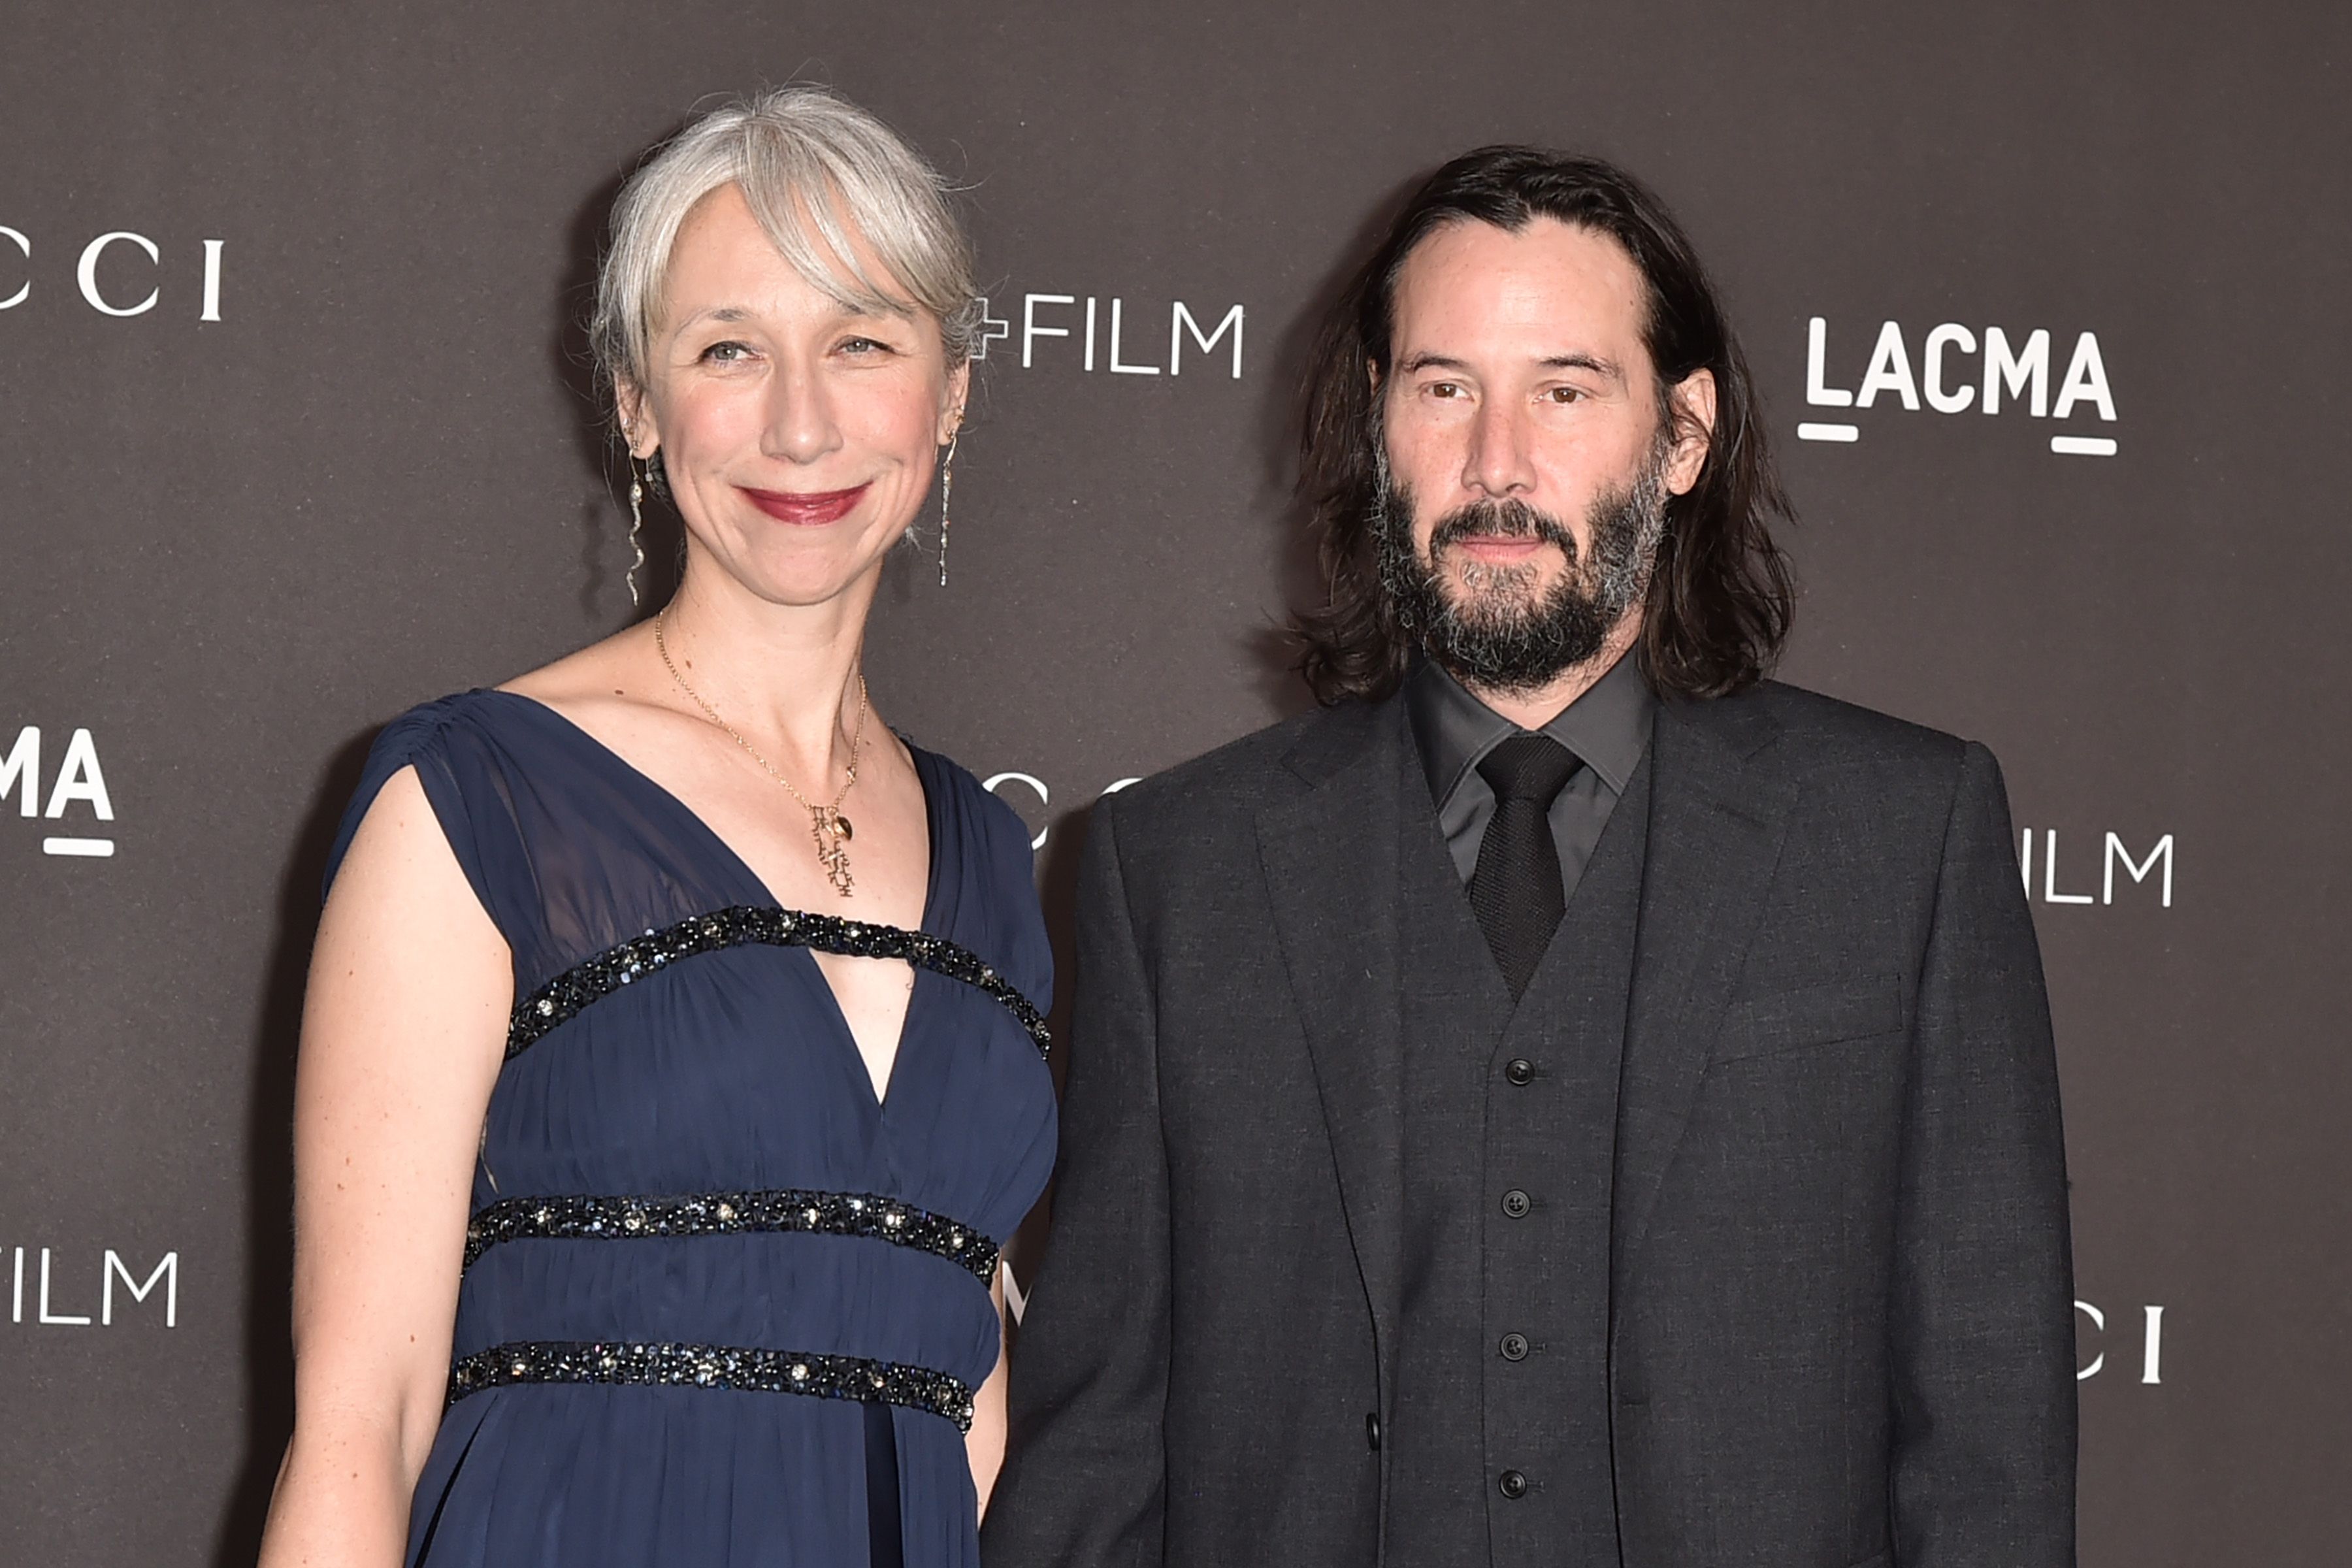 Keanu Reeves Fans Are Flipping Out to Learn He Has a New Girlfriend